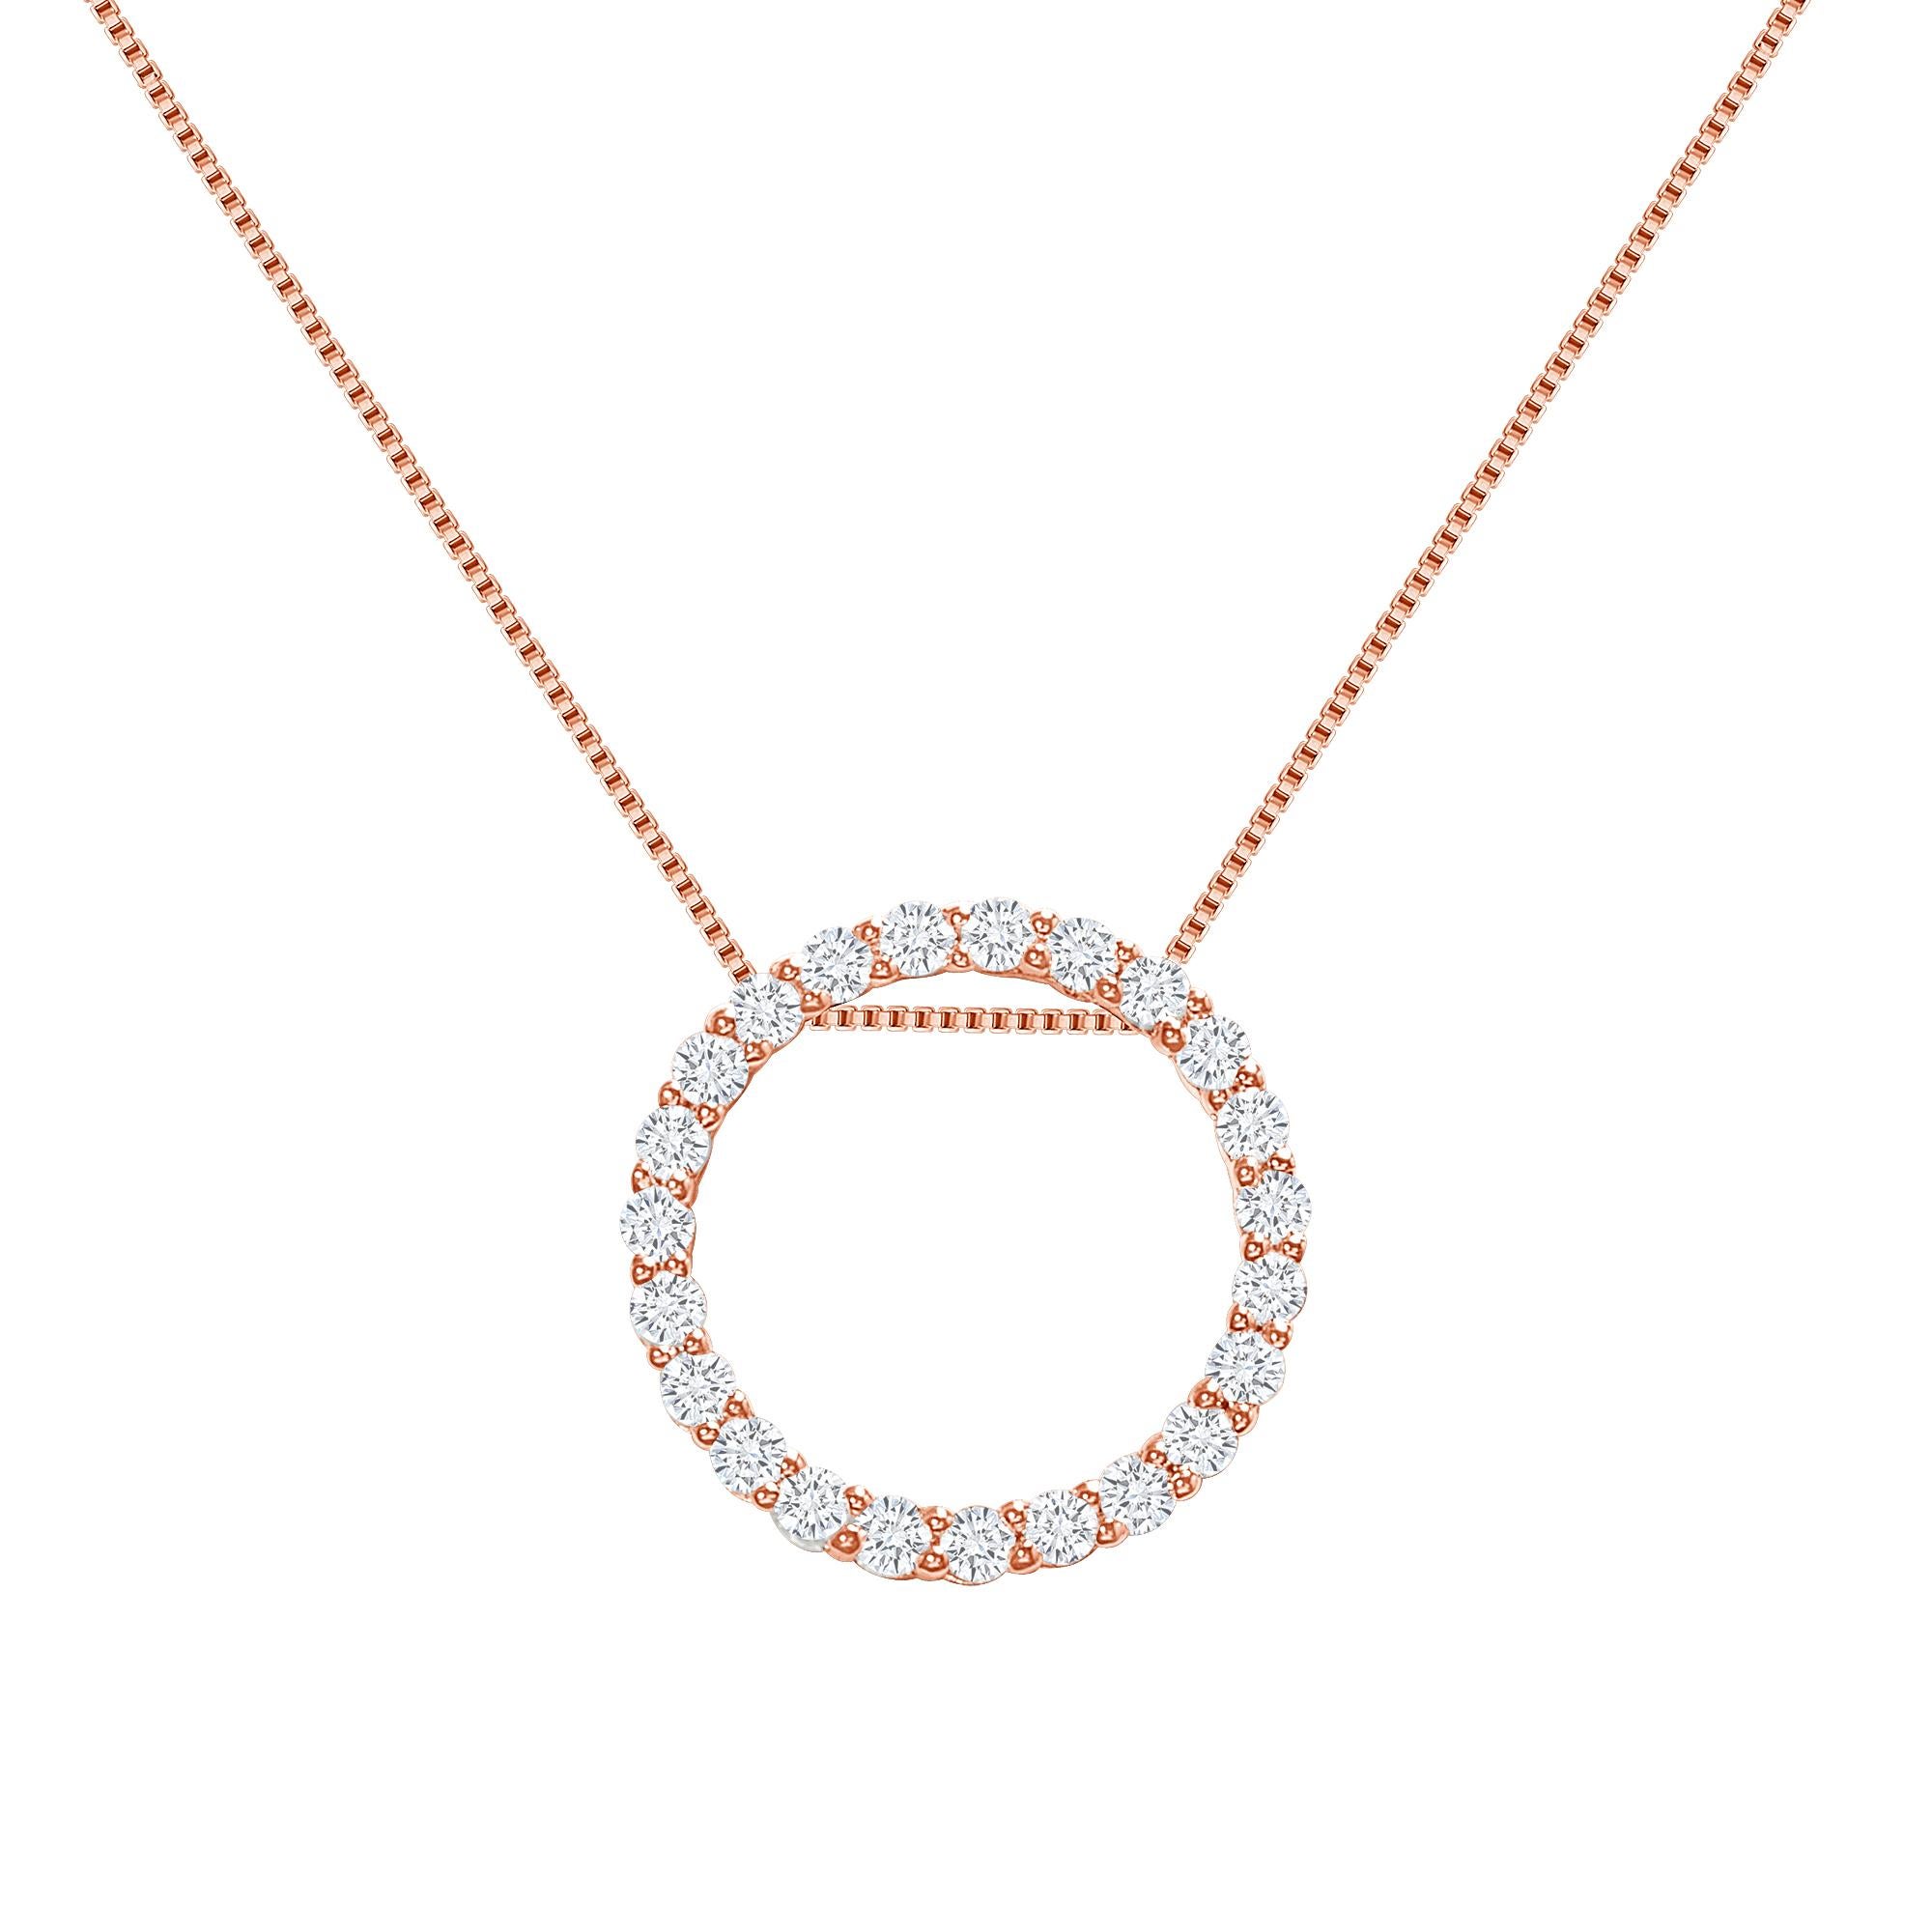 This diamond circle pendant provides a glowing chic look.
Metal: 14k Gold
Diamond Total Carats: 1 carat
Diamond Cut: Round Natural Diamonds (Not Lab Grown)
Diamond Clarity: VS
Diamond Color: F-G
Color: Rose Gold
Necklace Length: 14 inches